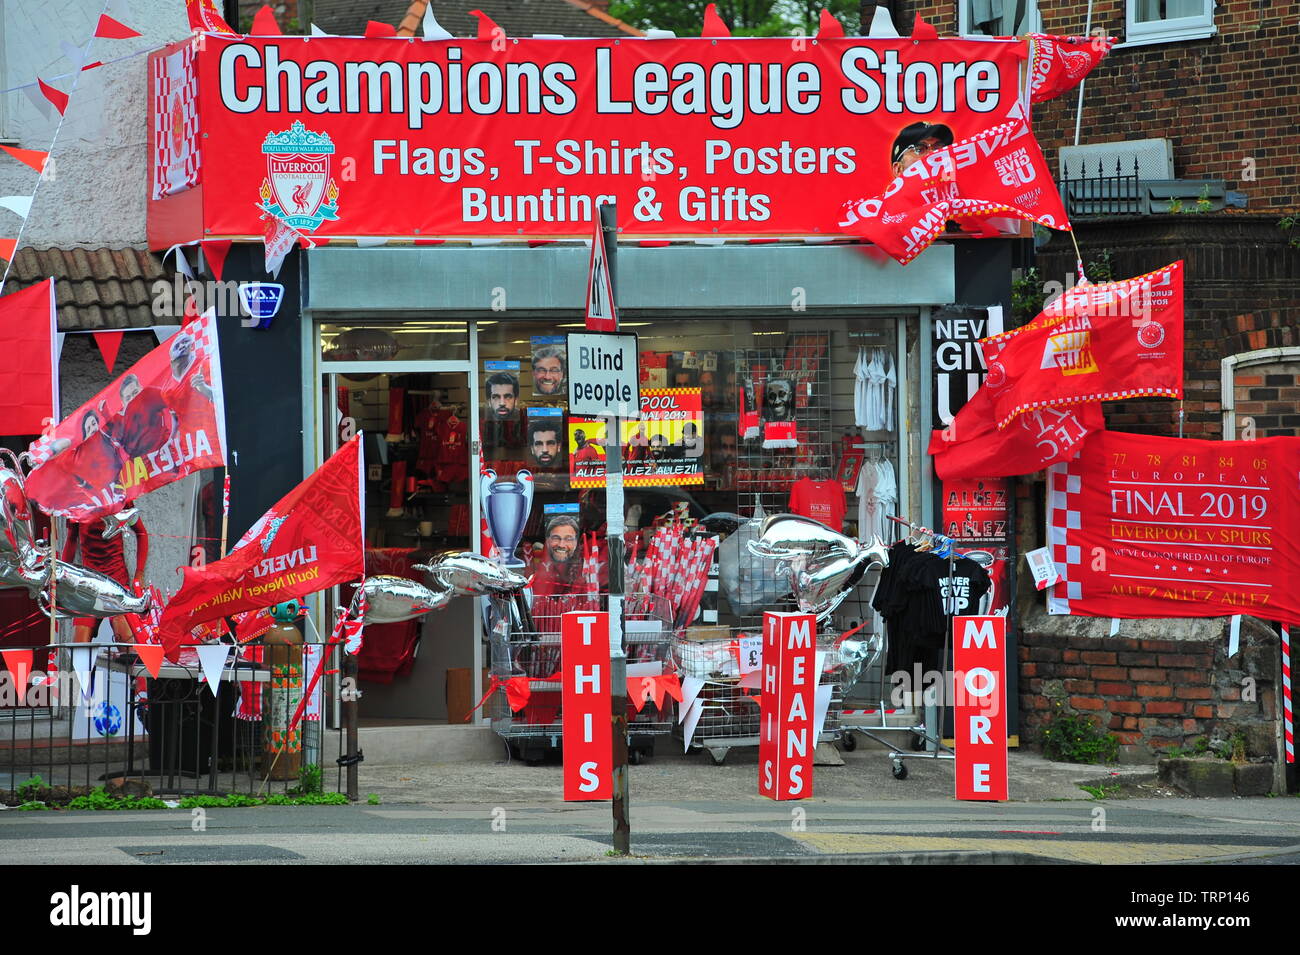 Pop up Champions League Stores in Liverpool prior to the 2019 Champions League Final between Liverpool & Tottenham Hotspur. Stock Photo